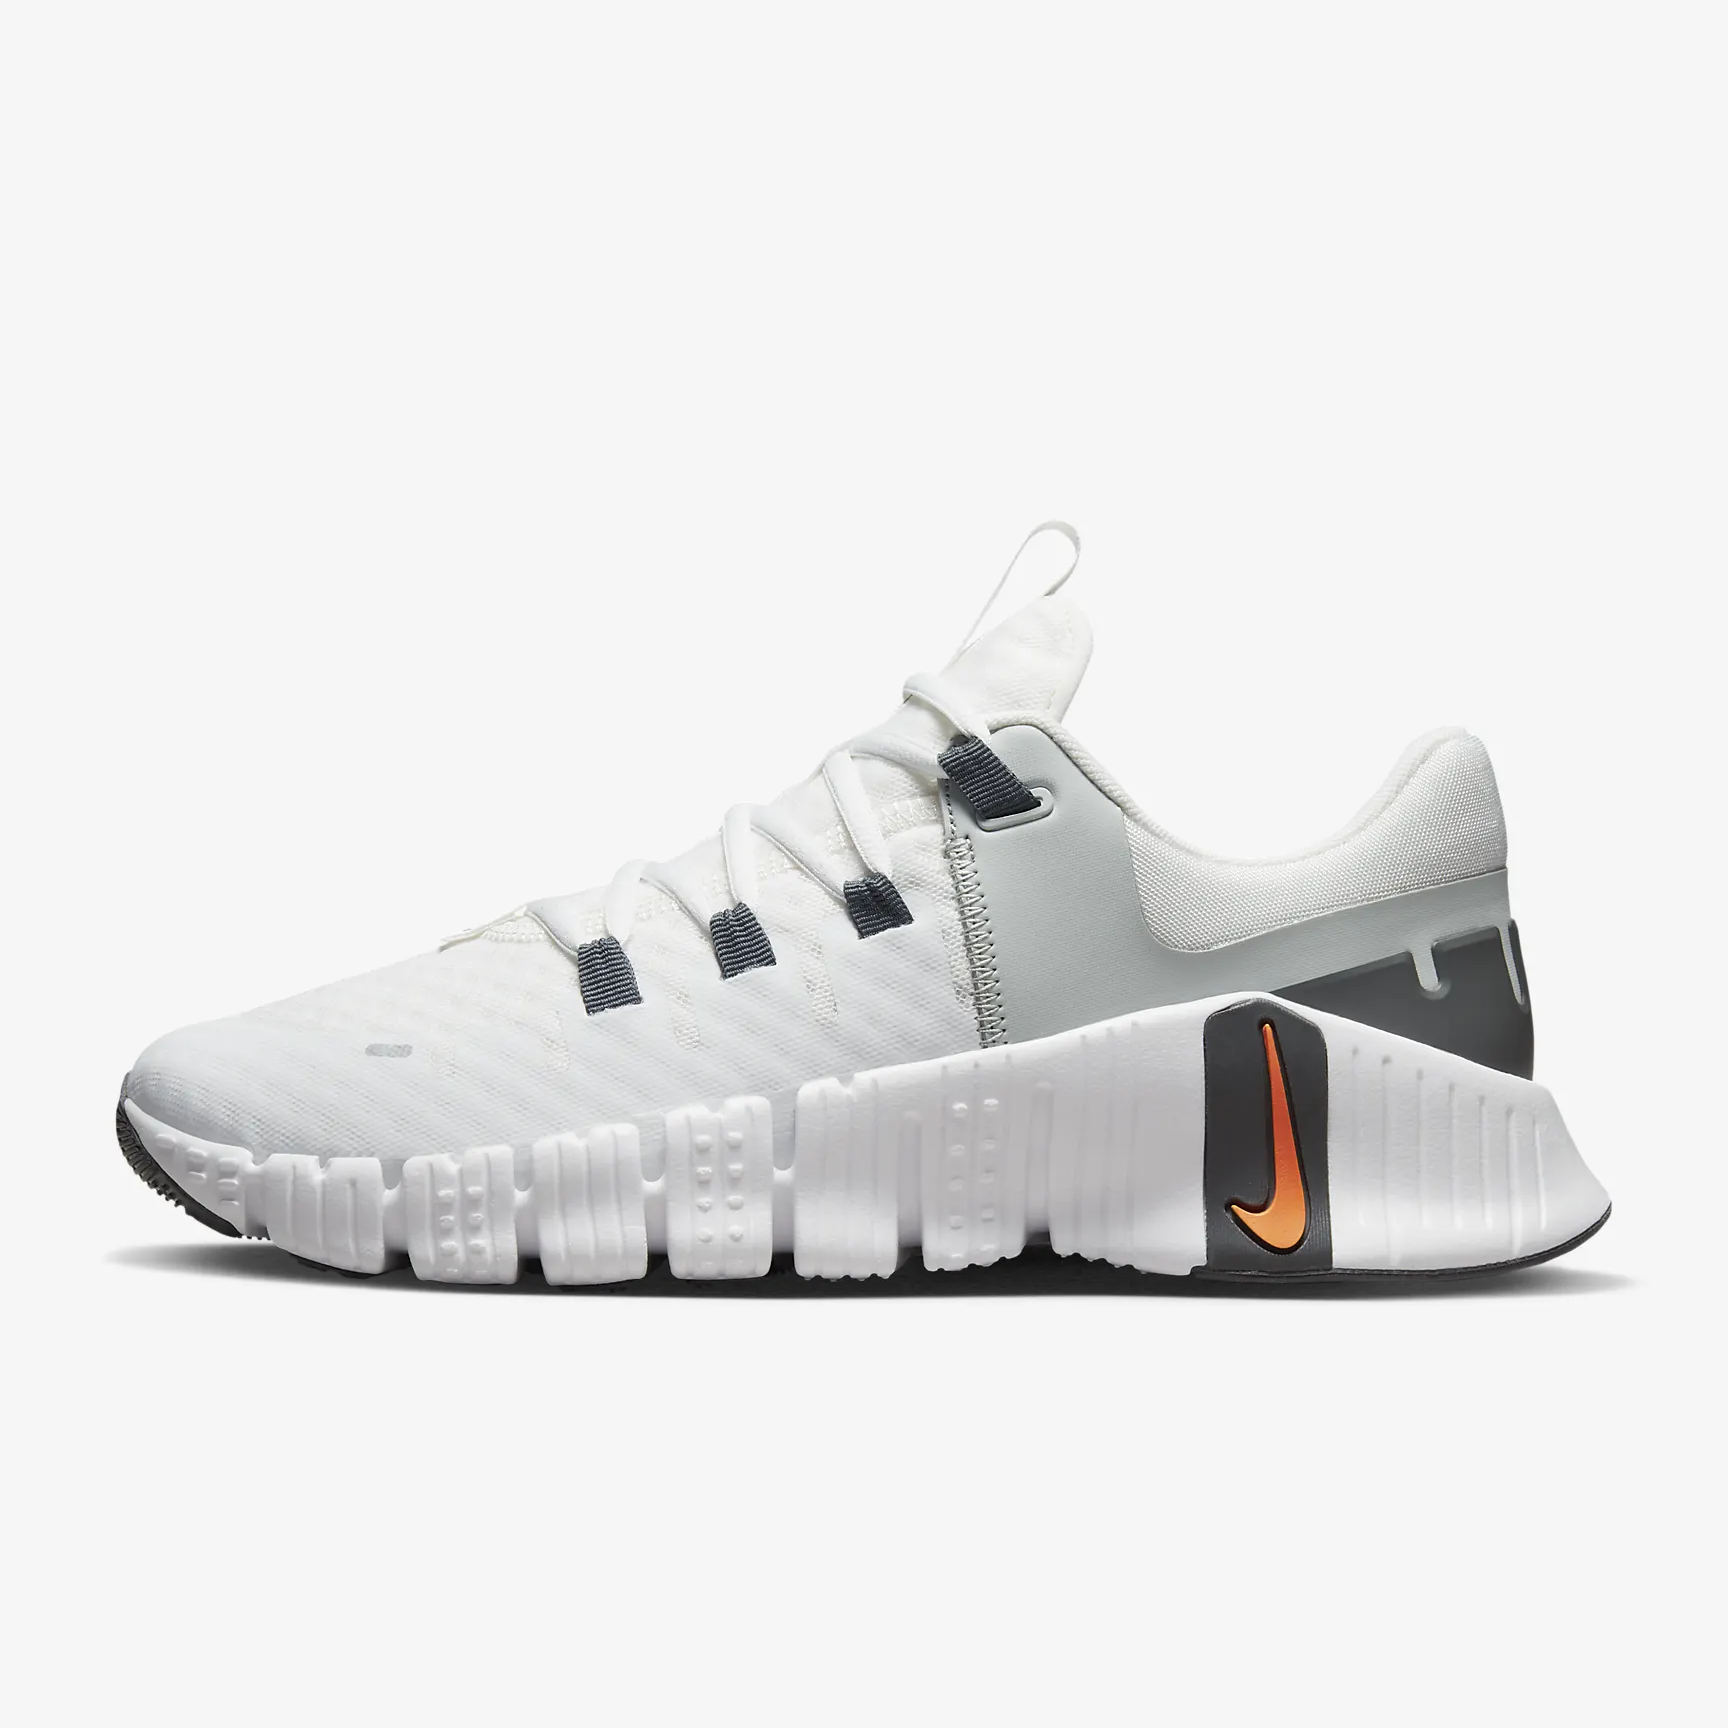 Nike Free Metcon 5 shoes for crossfit